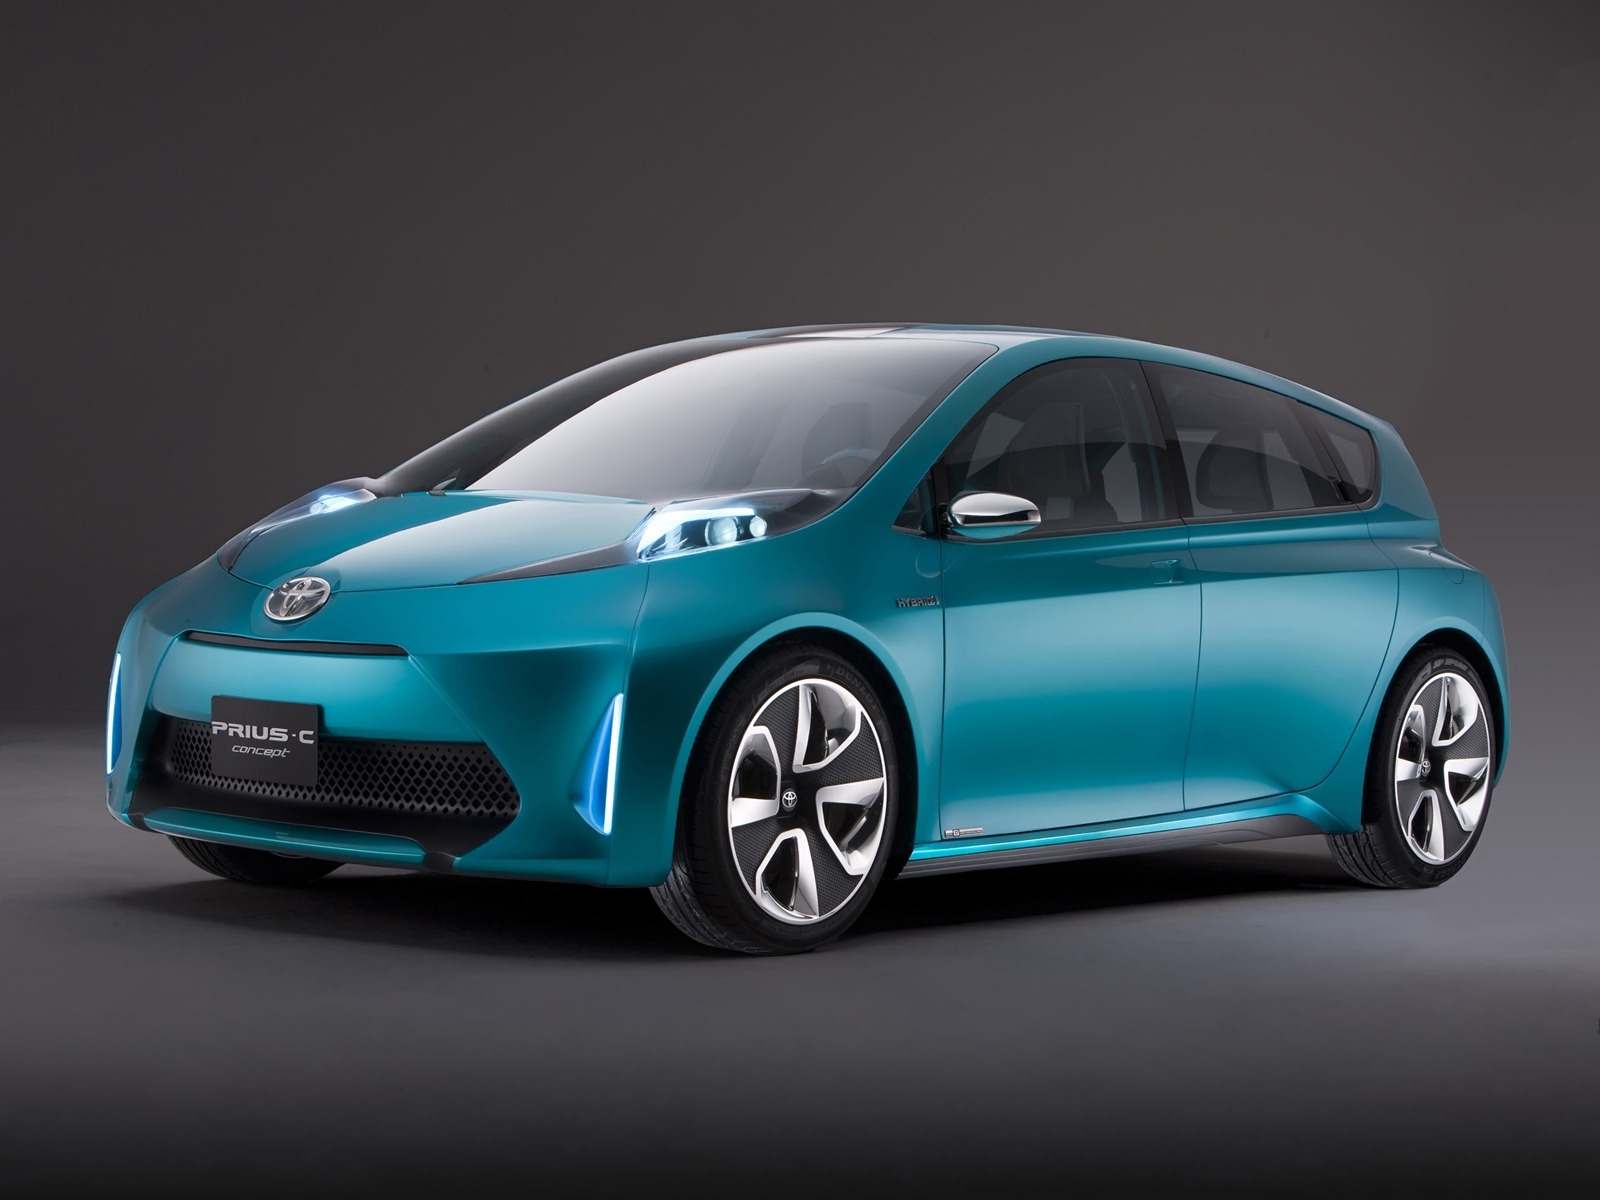 2011 Toyota Prius C Concept for 1600 x 1200 resolution